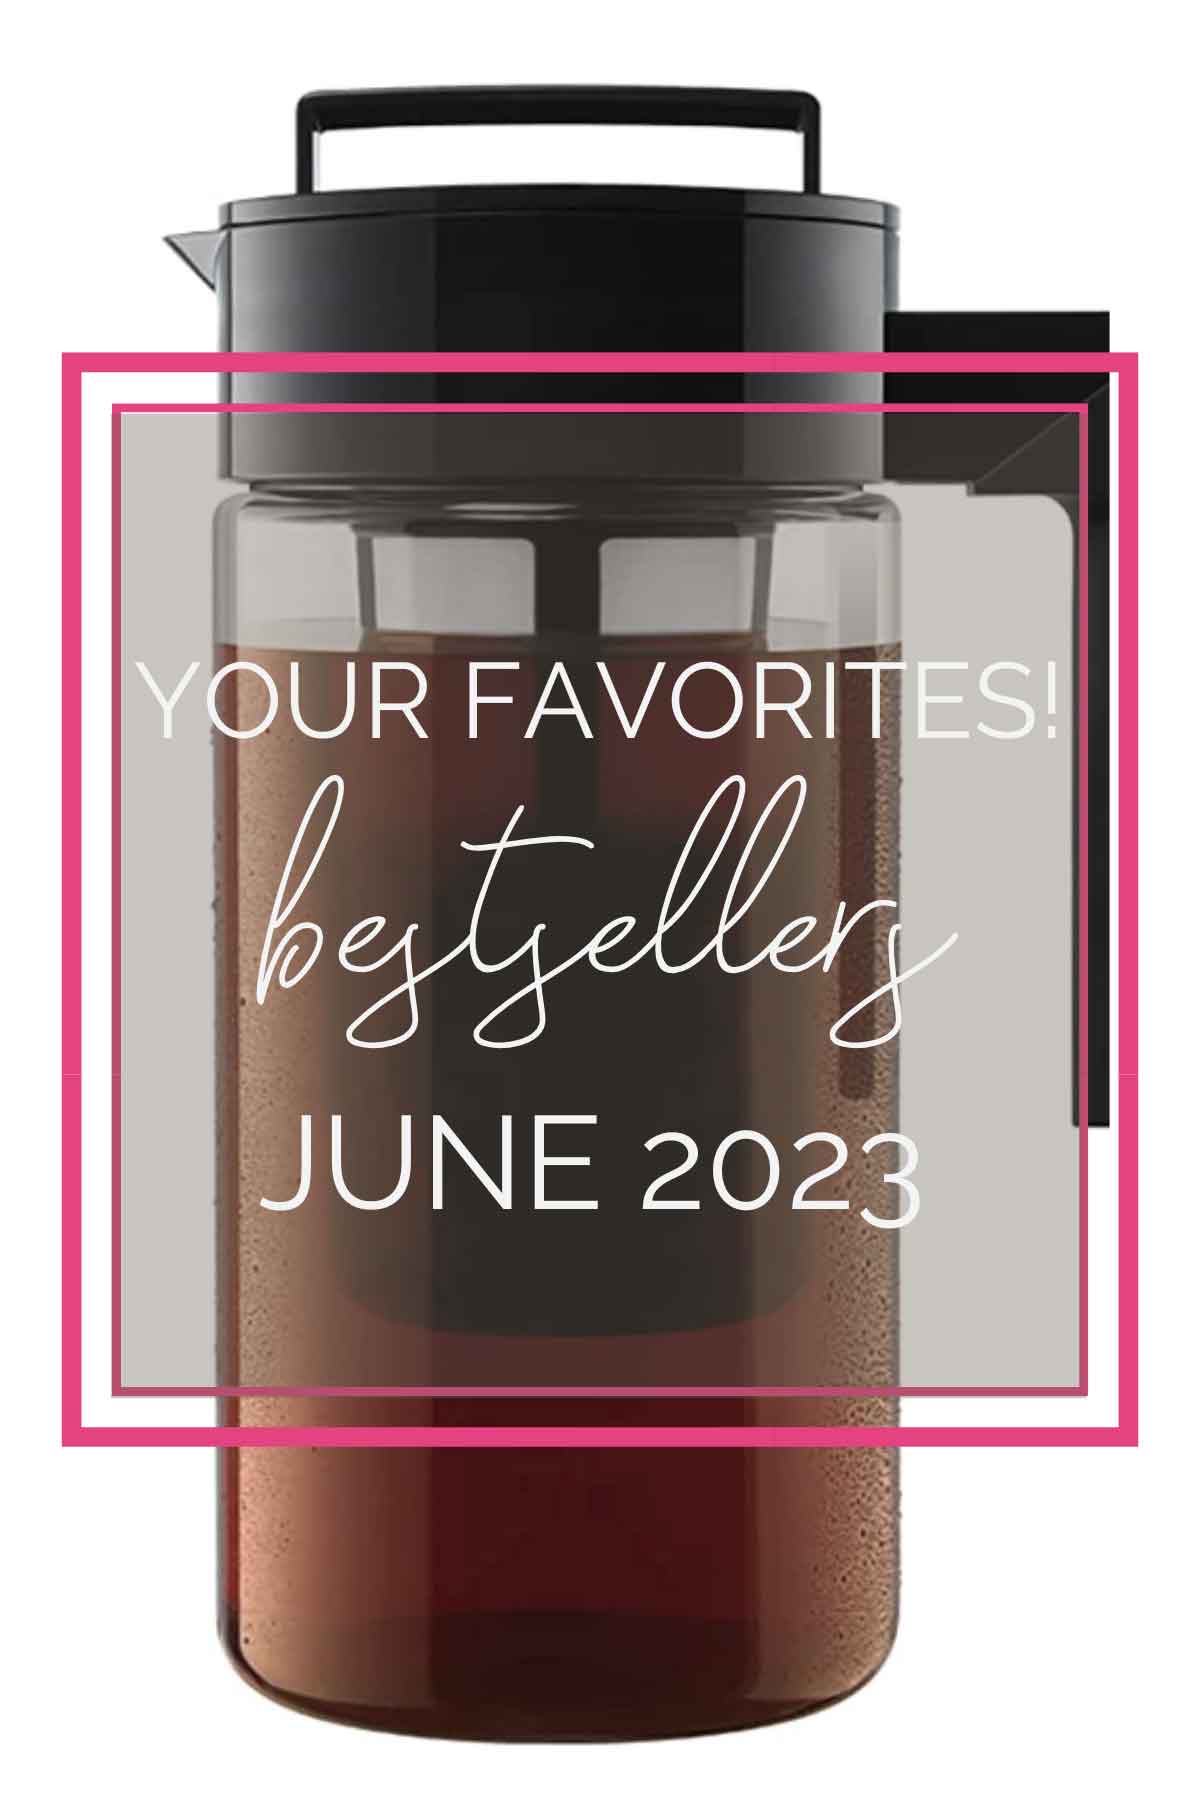 Cold brew pitcher with the words "Your Favorites! Bestsellers June 2023" overlaid with a pink square around them.